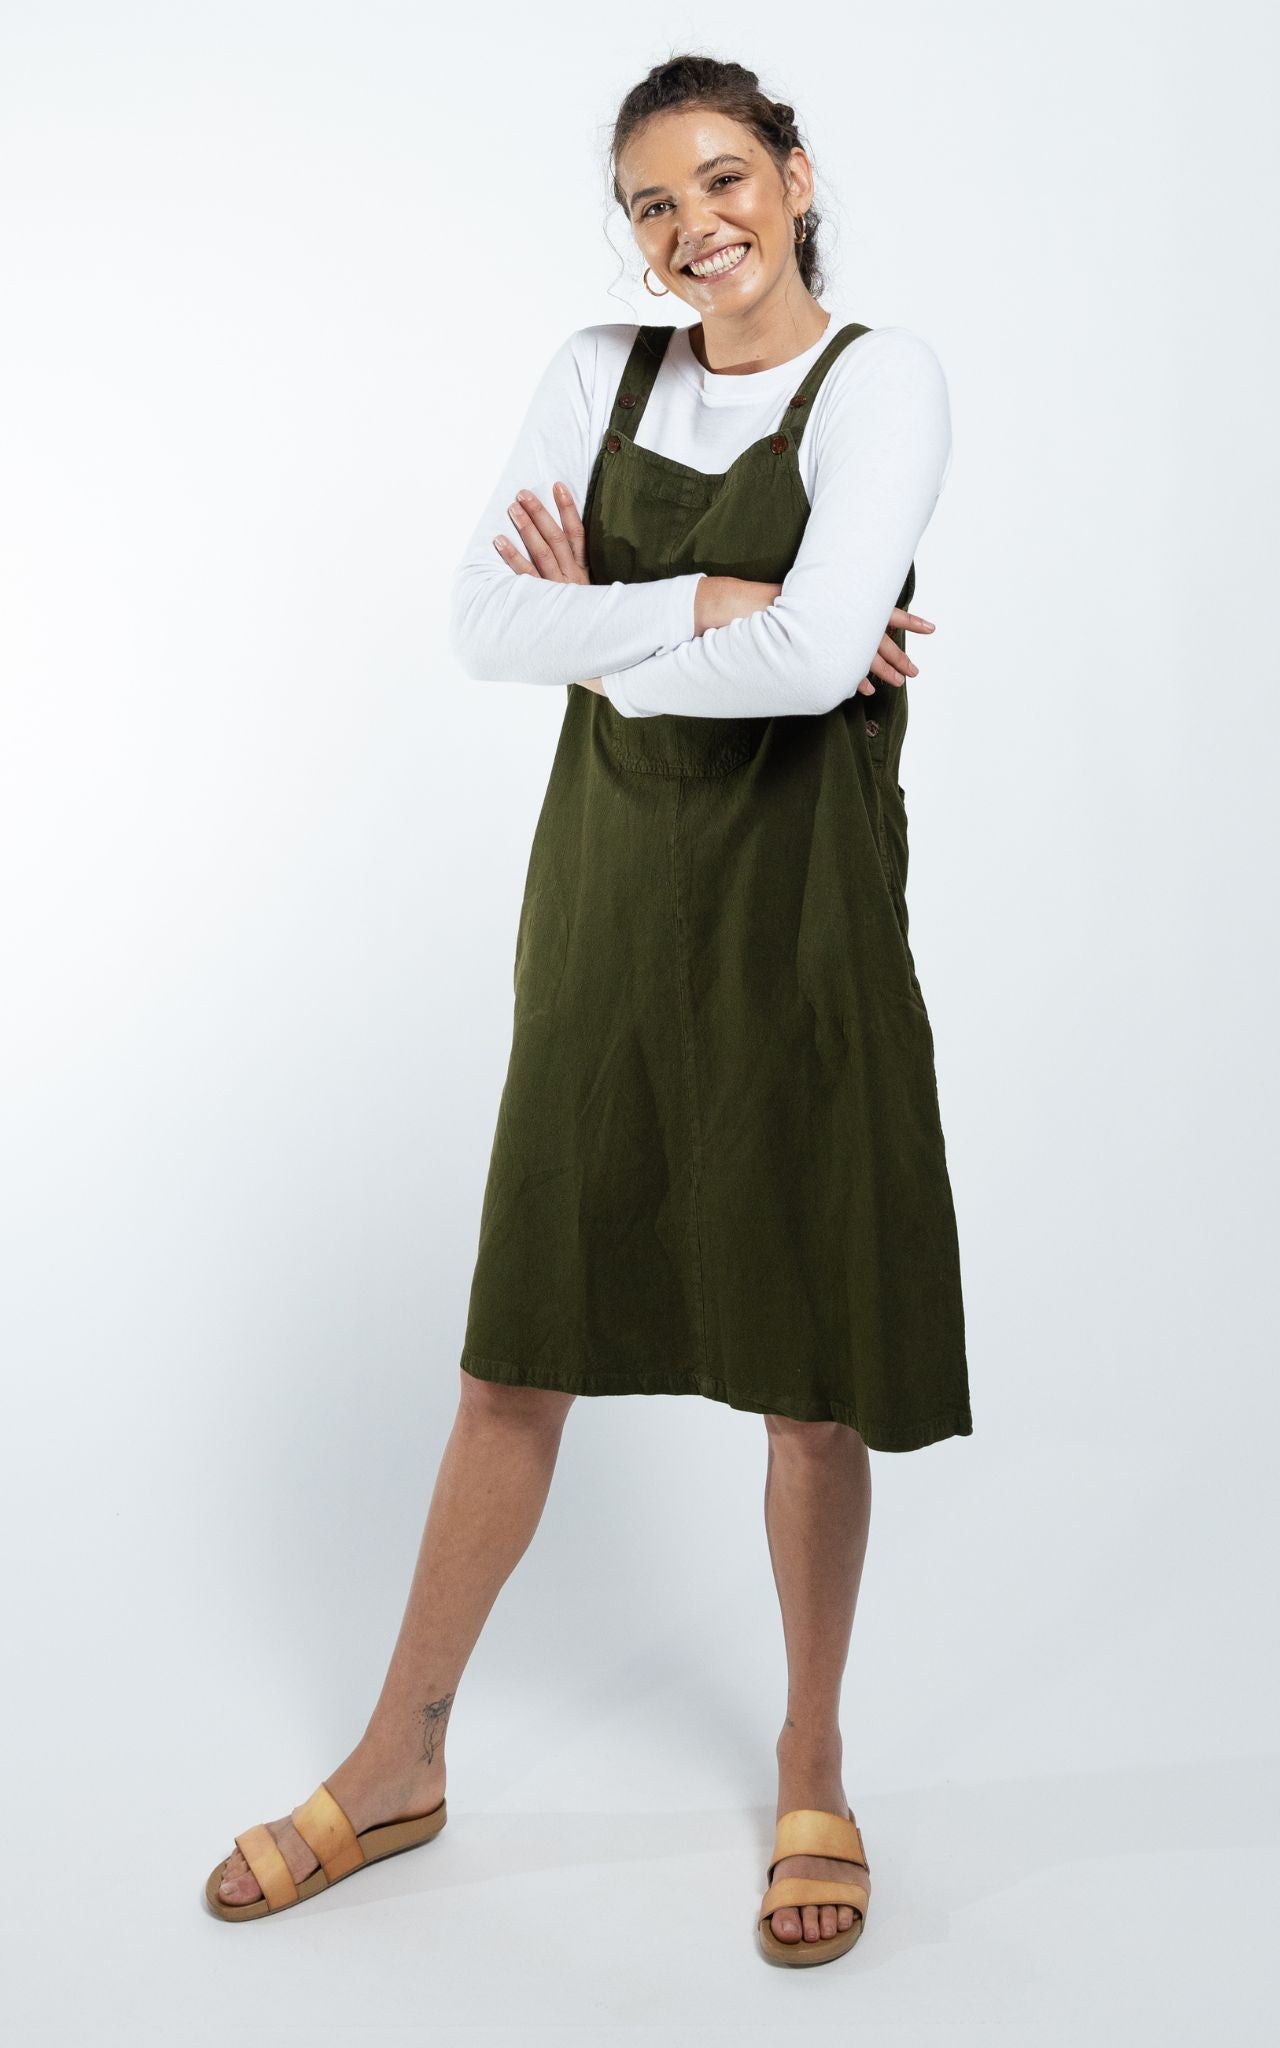 Surya Australia Ethical Cotton 'Ayla' Pinafore made in Nepal - Green